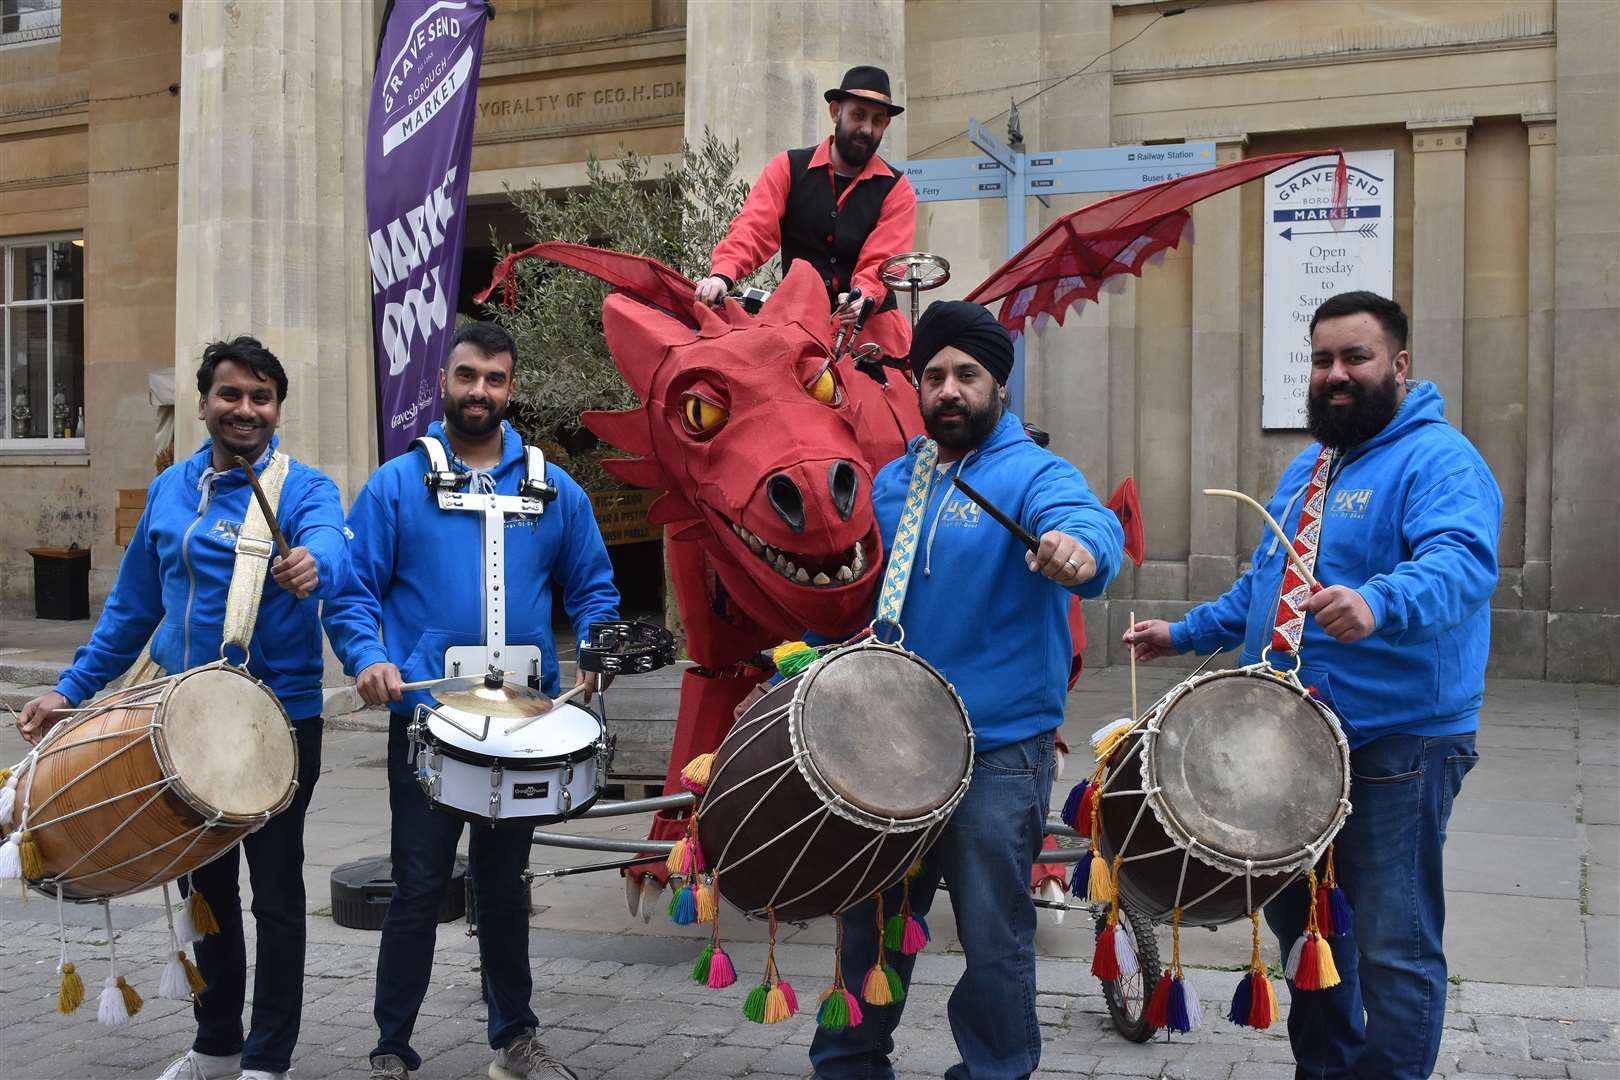 Drummers and the Dragon in Gravesend on Friday Photo: Jason Arthur